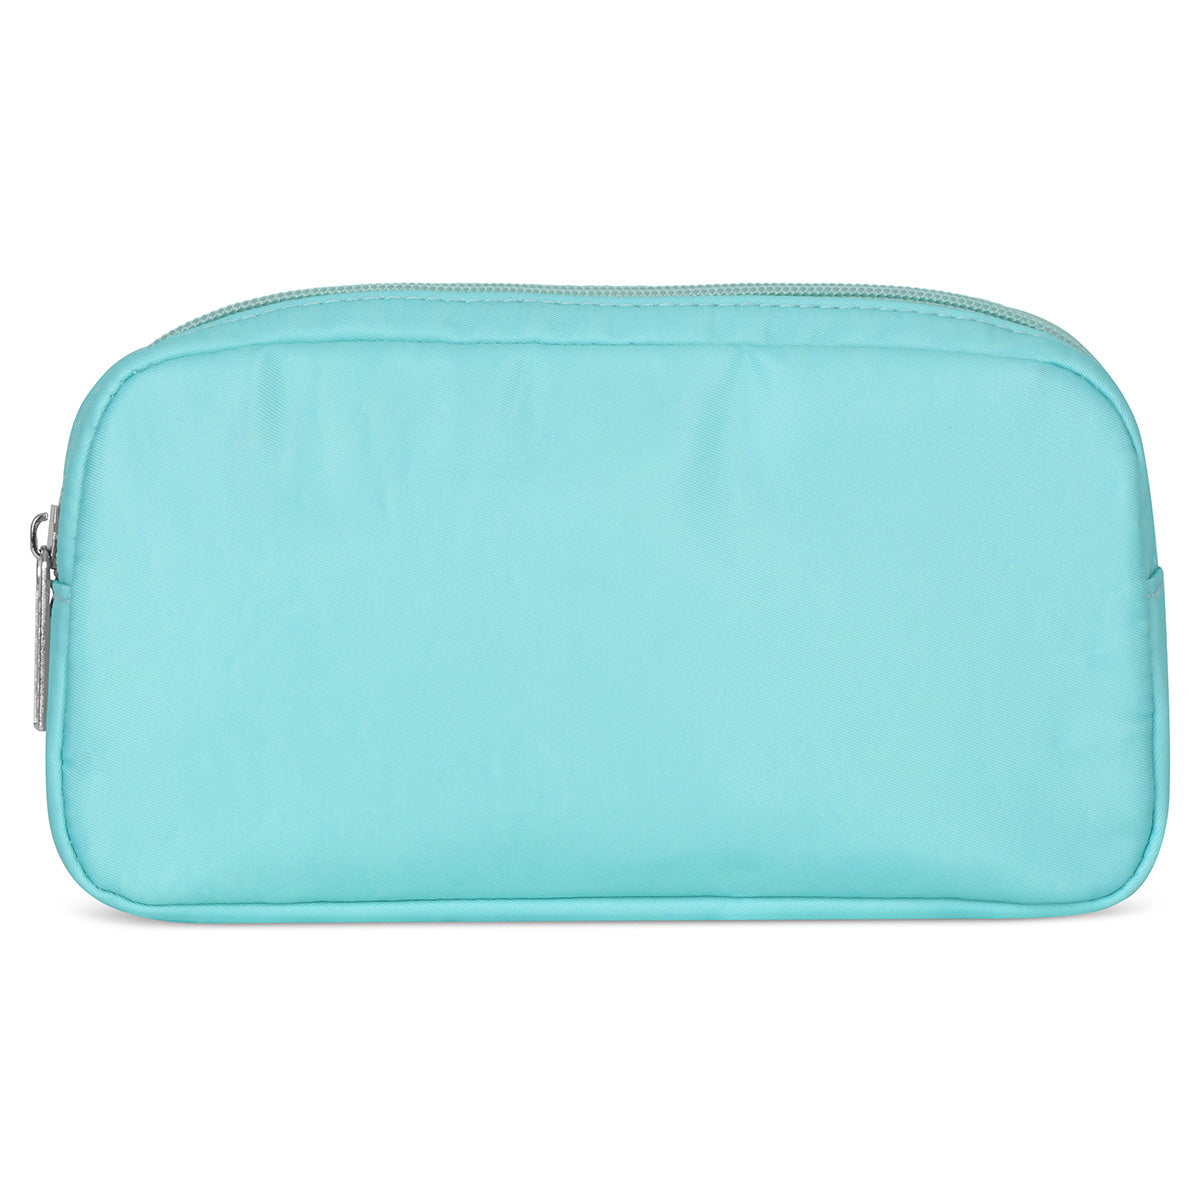 Blue Small Cosmetic Bag Cover